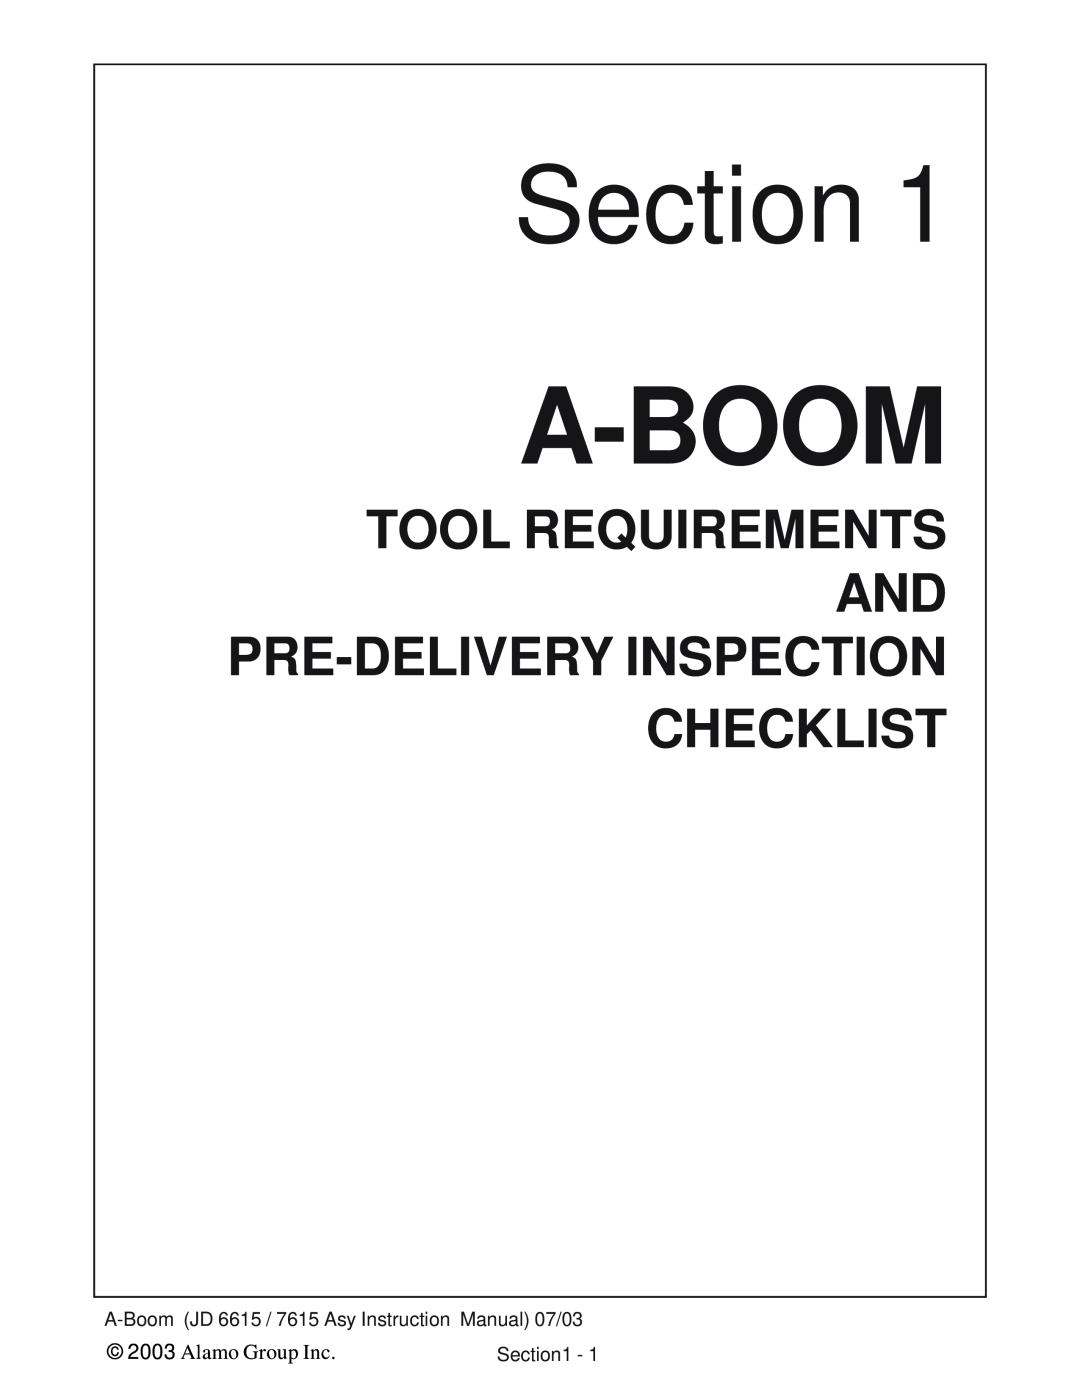 Alamo DSEB-D16/SAS Section, A-Boom, Tool Requirements And Pre-Delivery Inspection Checklist, Alamo Group Inc 